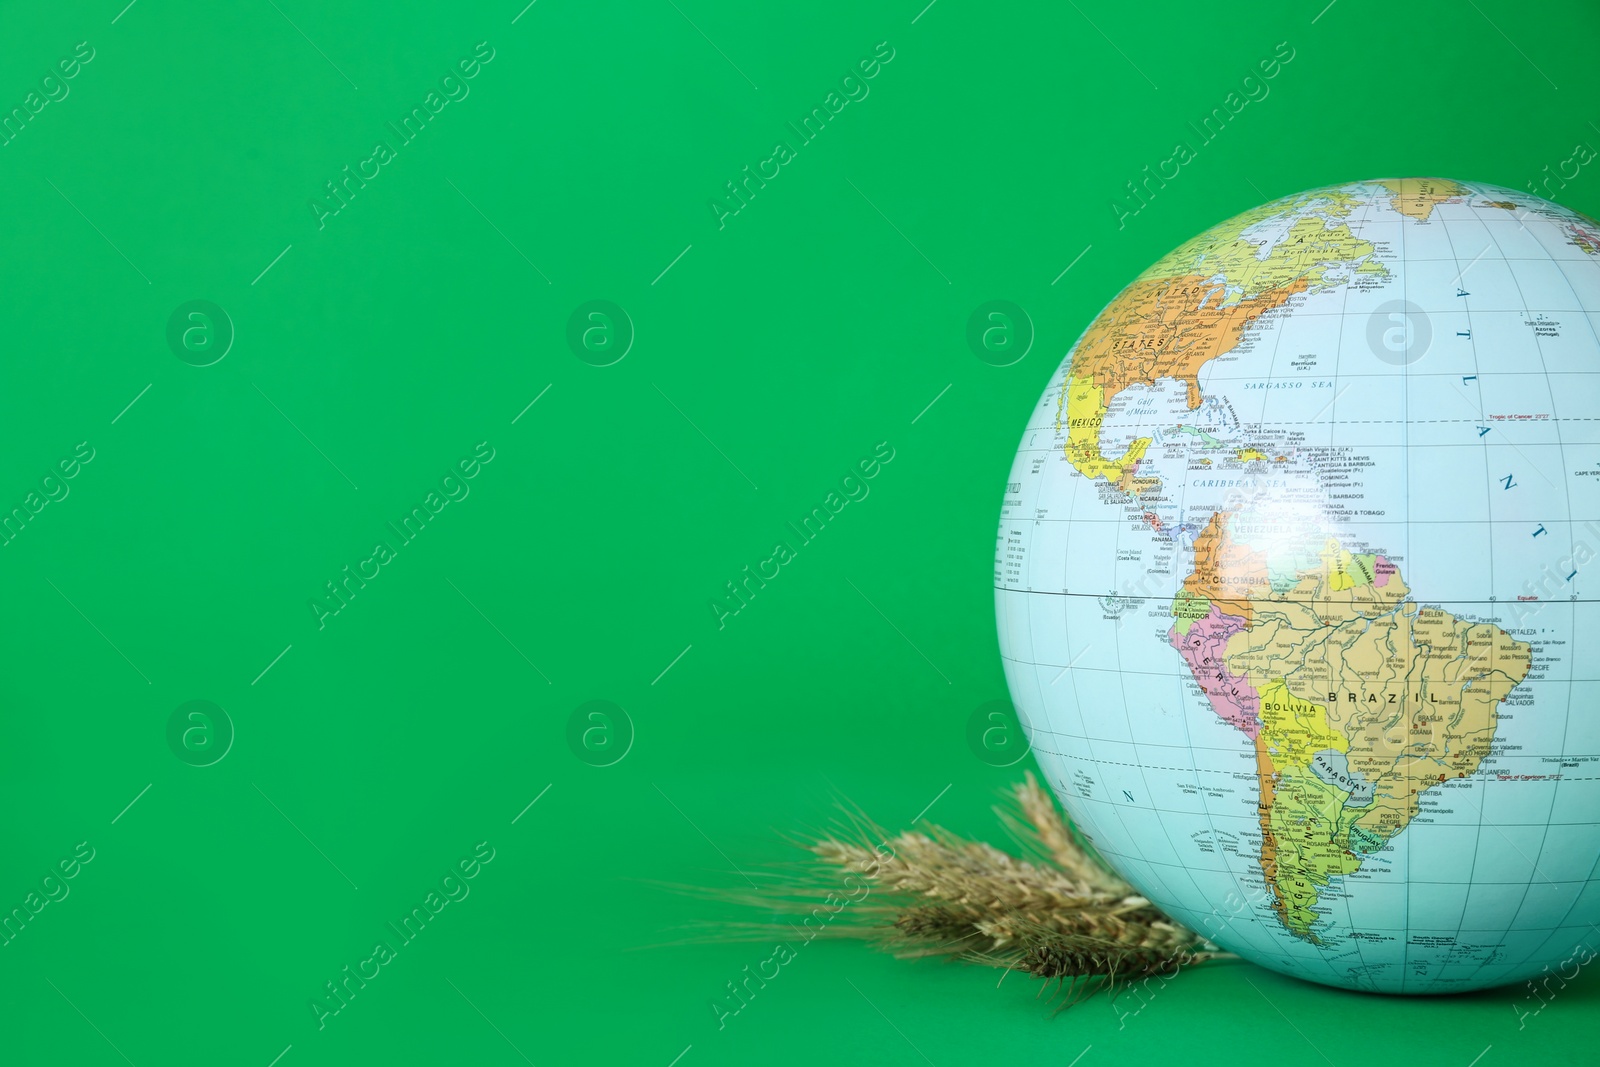 Photo of Globe with wheat spikelets on green background, space for text. Hunger crisis concept